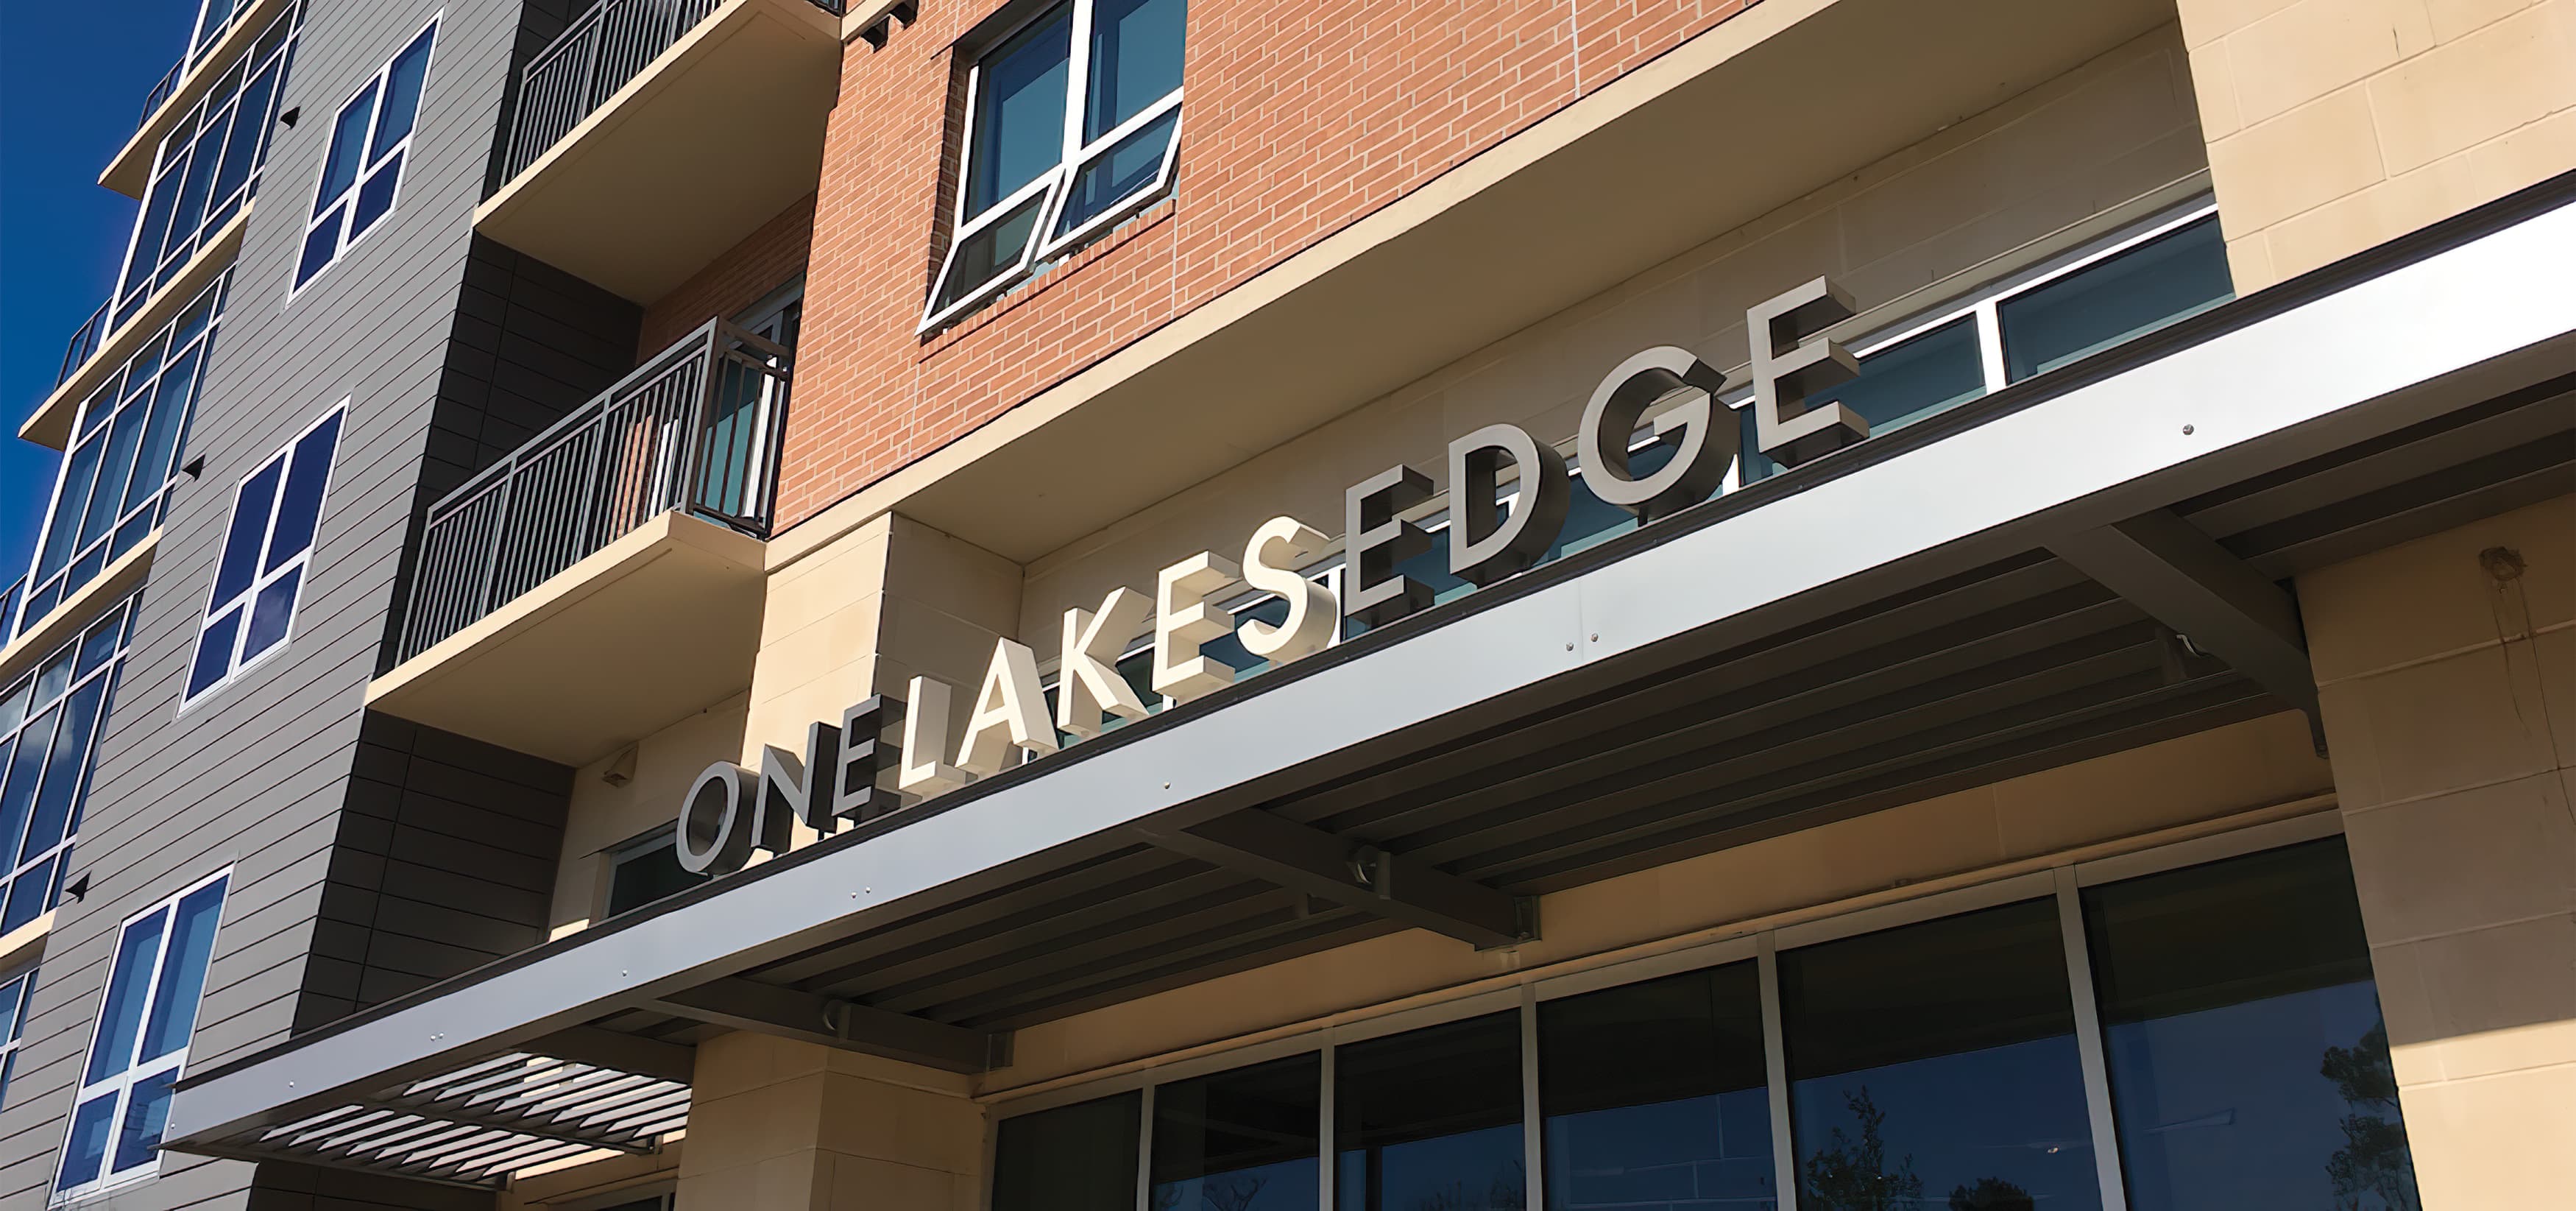 Hughes Landing, a mixed-use development in  The Woodlands, Texas. Building Signage. Project Signage. Canopy Signage.